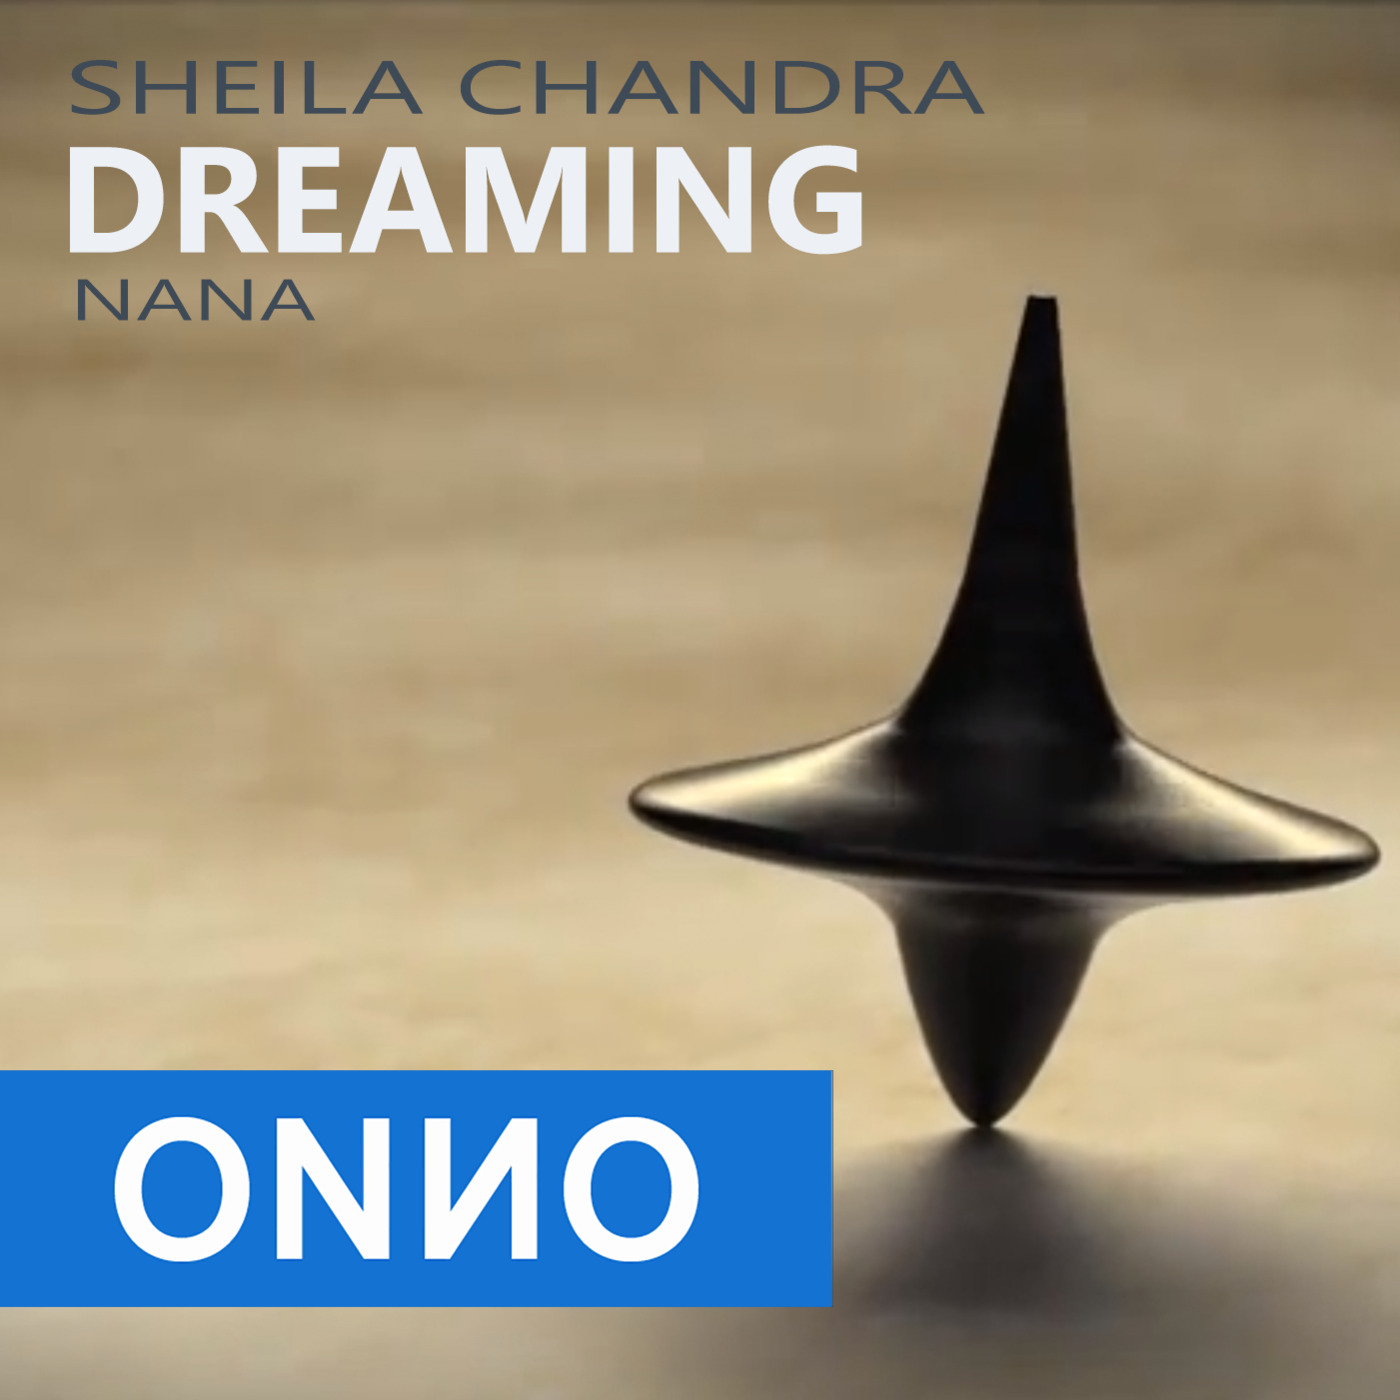 Onno Boomstra with Sheila Chandra - Dreaming (Nana) - Extended Inception Mix